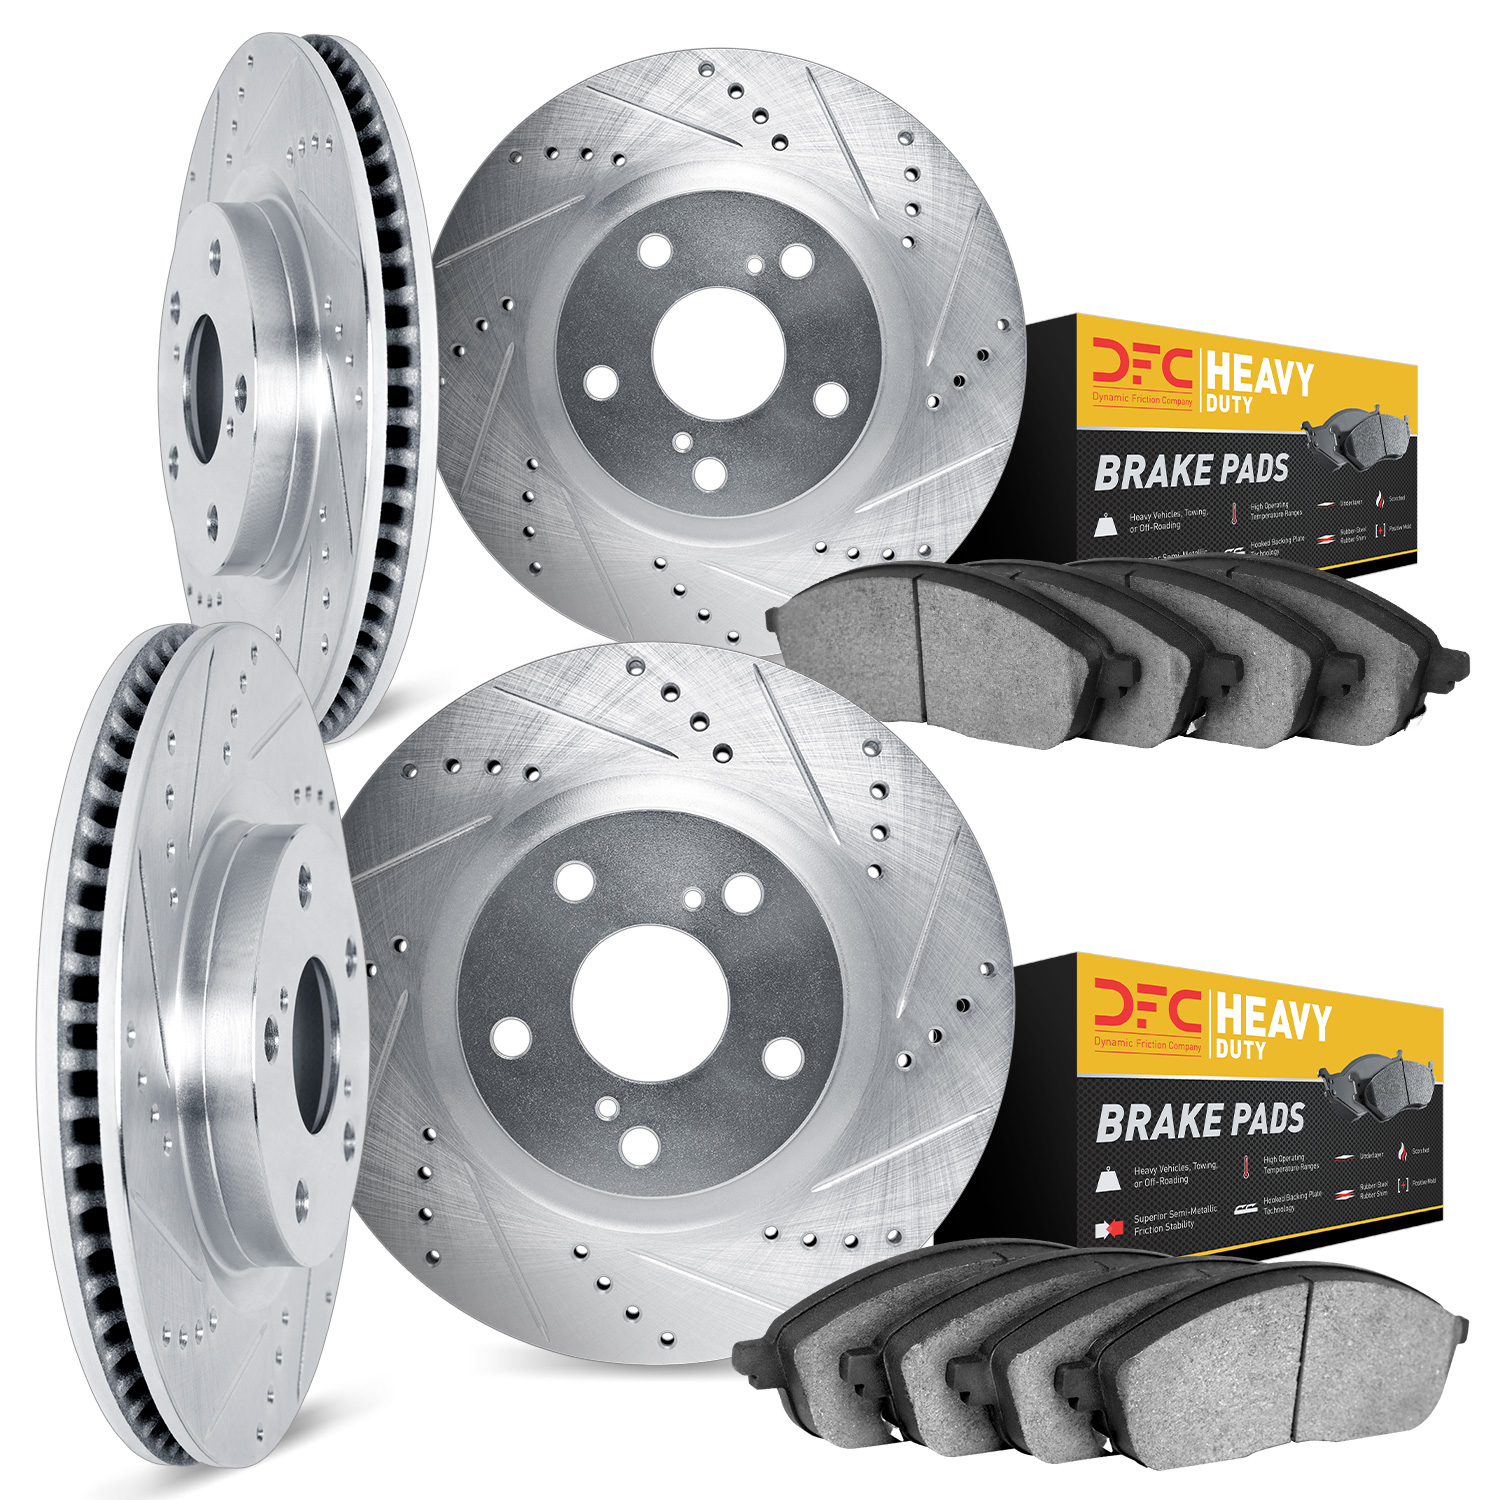 7204-76007 Drilled/Slotted Rotors w/Heavy-Duty Brake Pads Kit [Silver], 2008-2021 Lexus/Toyota/Scion, Position: Front and Rear